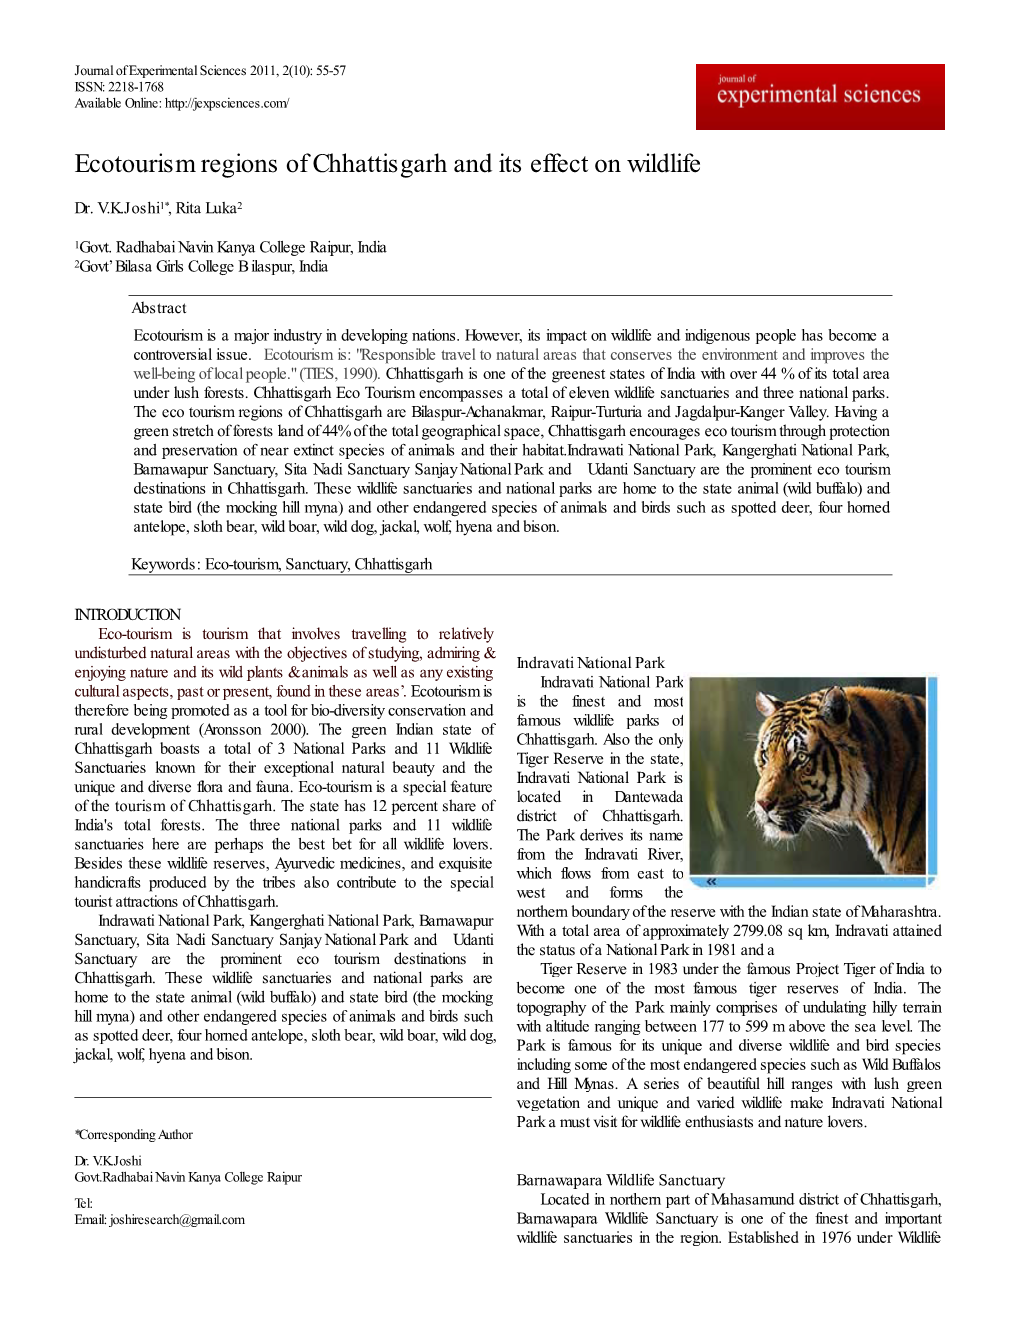 Ecotourism Regions of Chhattisgarh and Its Effect on Wildlife